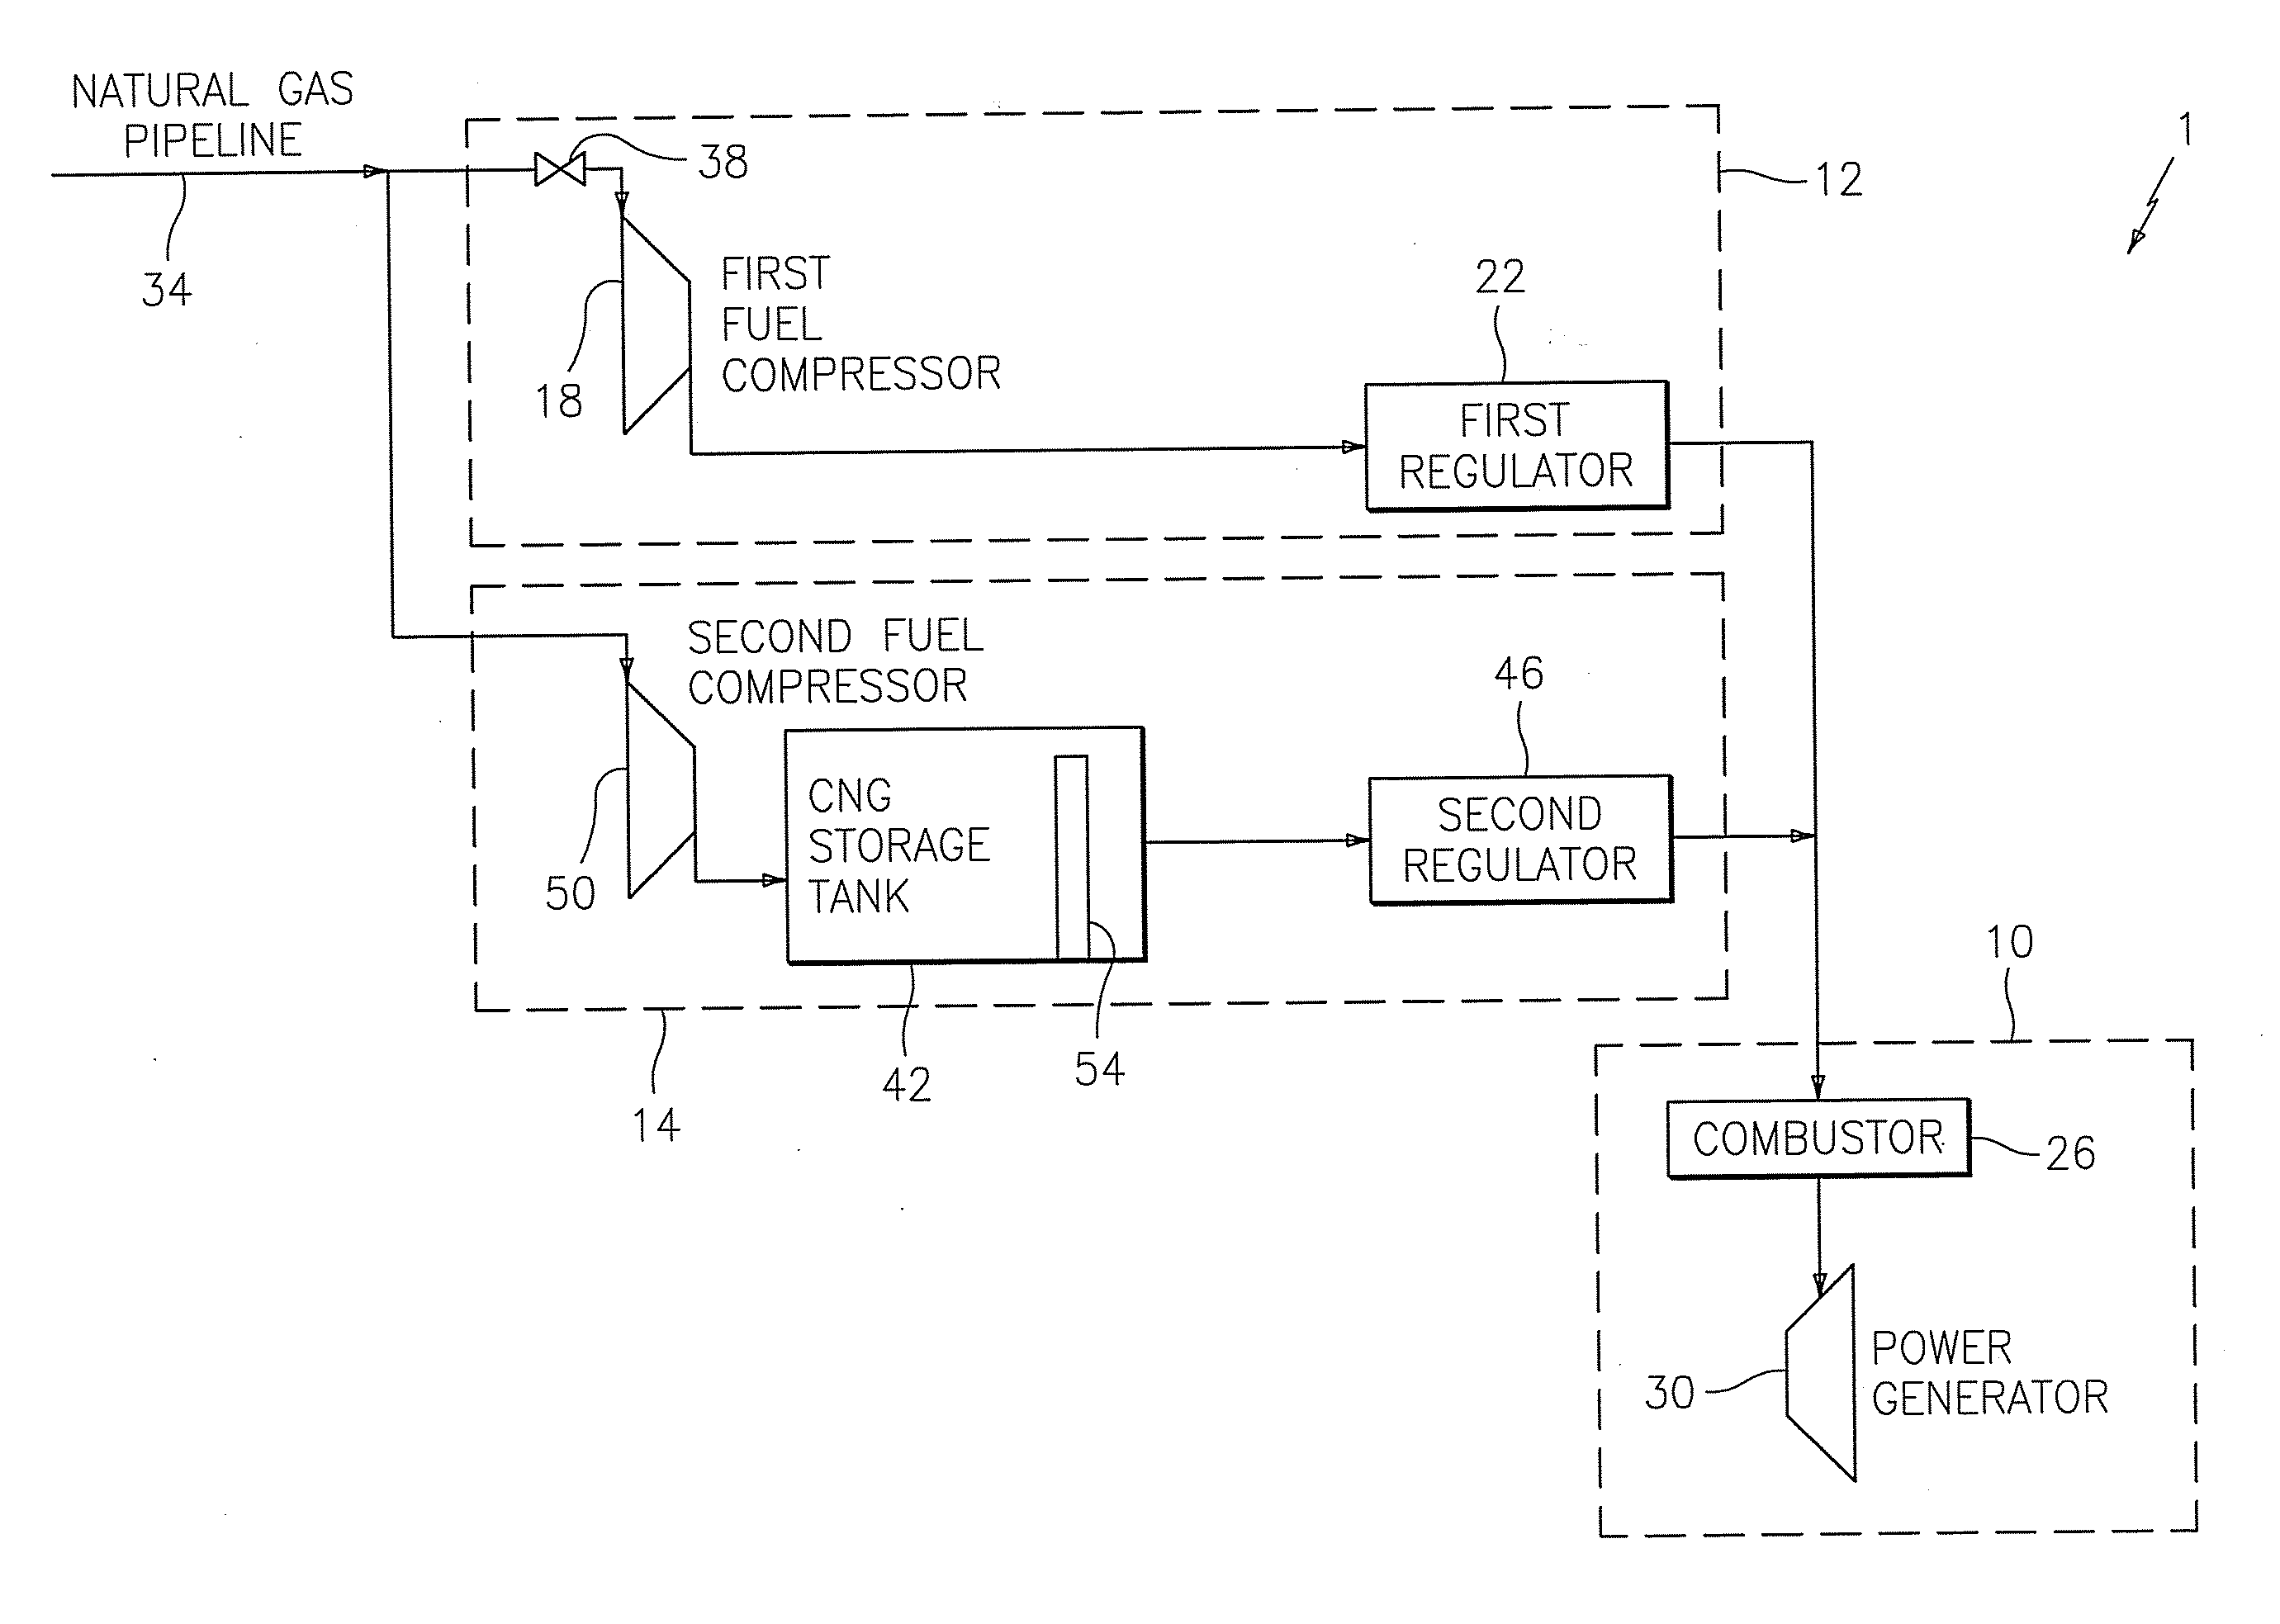 Method, system and computer product for ensuring backup generator fuel availability